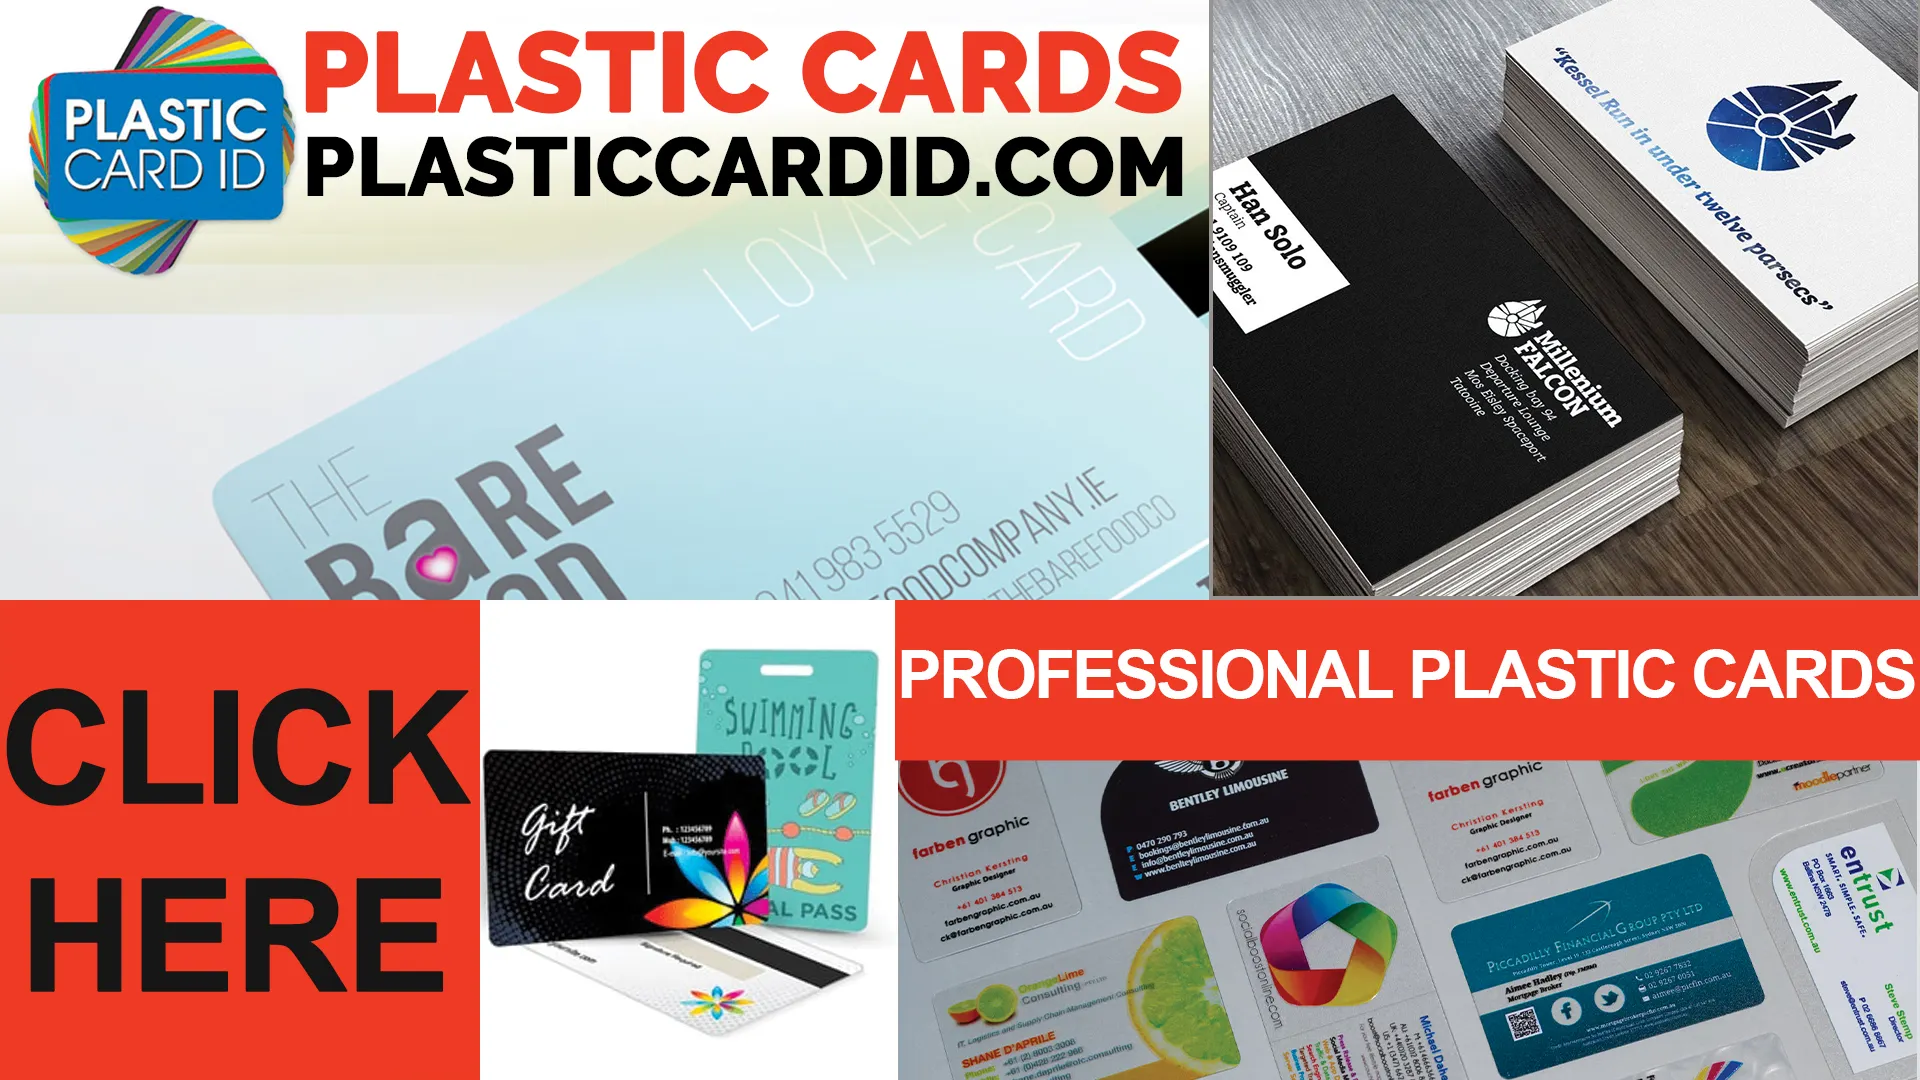 Welcome to Plastic Card ID
, Your Trusted Partner for ID and Secure Cards Printing